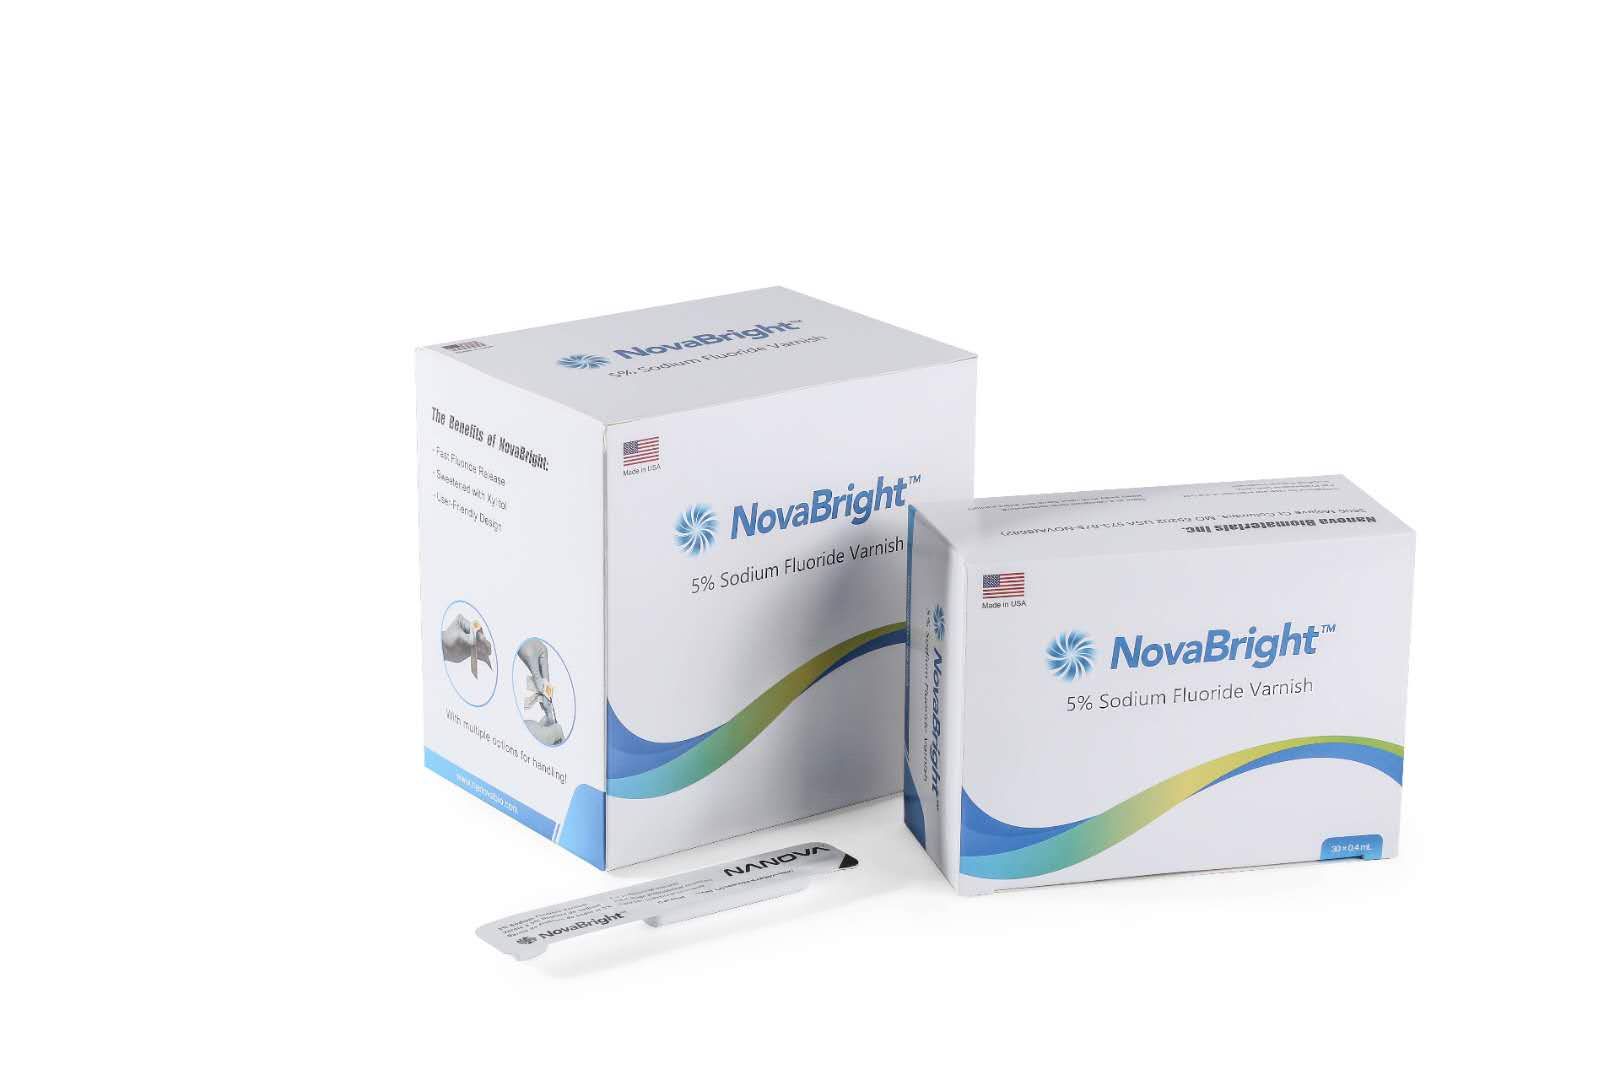 NovaBright™ 5% Sodium Fluoride Varnish is an in-office topical fluoride preparation for use as a cavity varnish and for the treatment of dentin hypersensitivity. The brush applicator included in every unit makes NovaBright™ an easy product for use in busy dental offices. Patients are able to leave immediately after treatment. The 30ct and 250ct box are available to all dental offices.